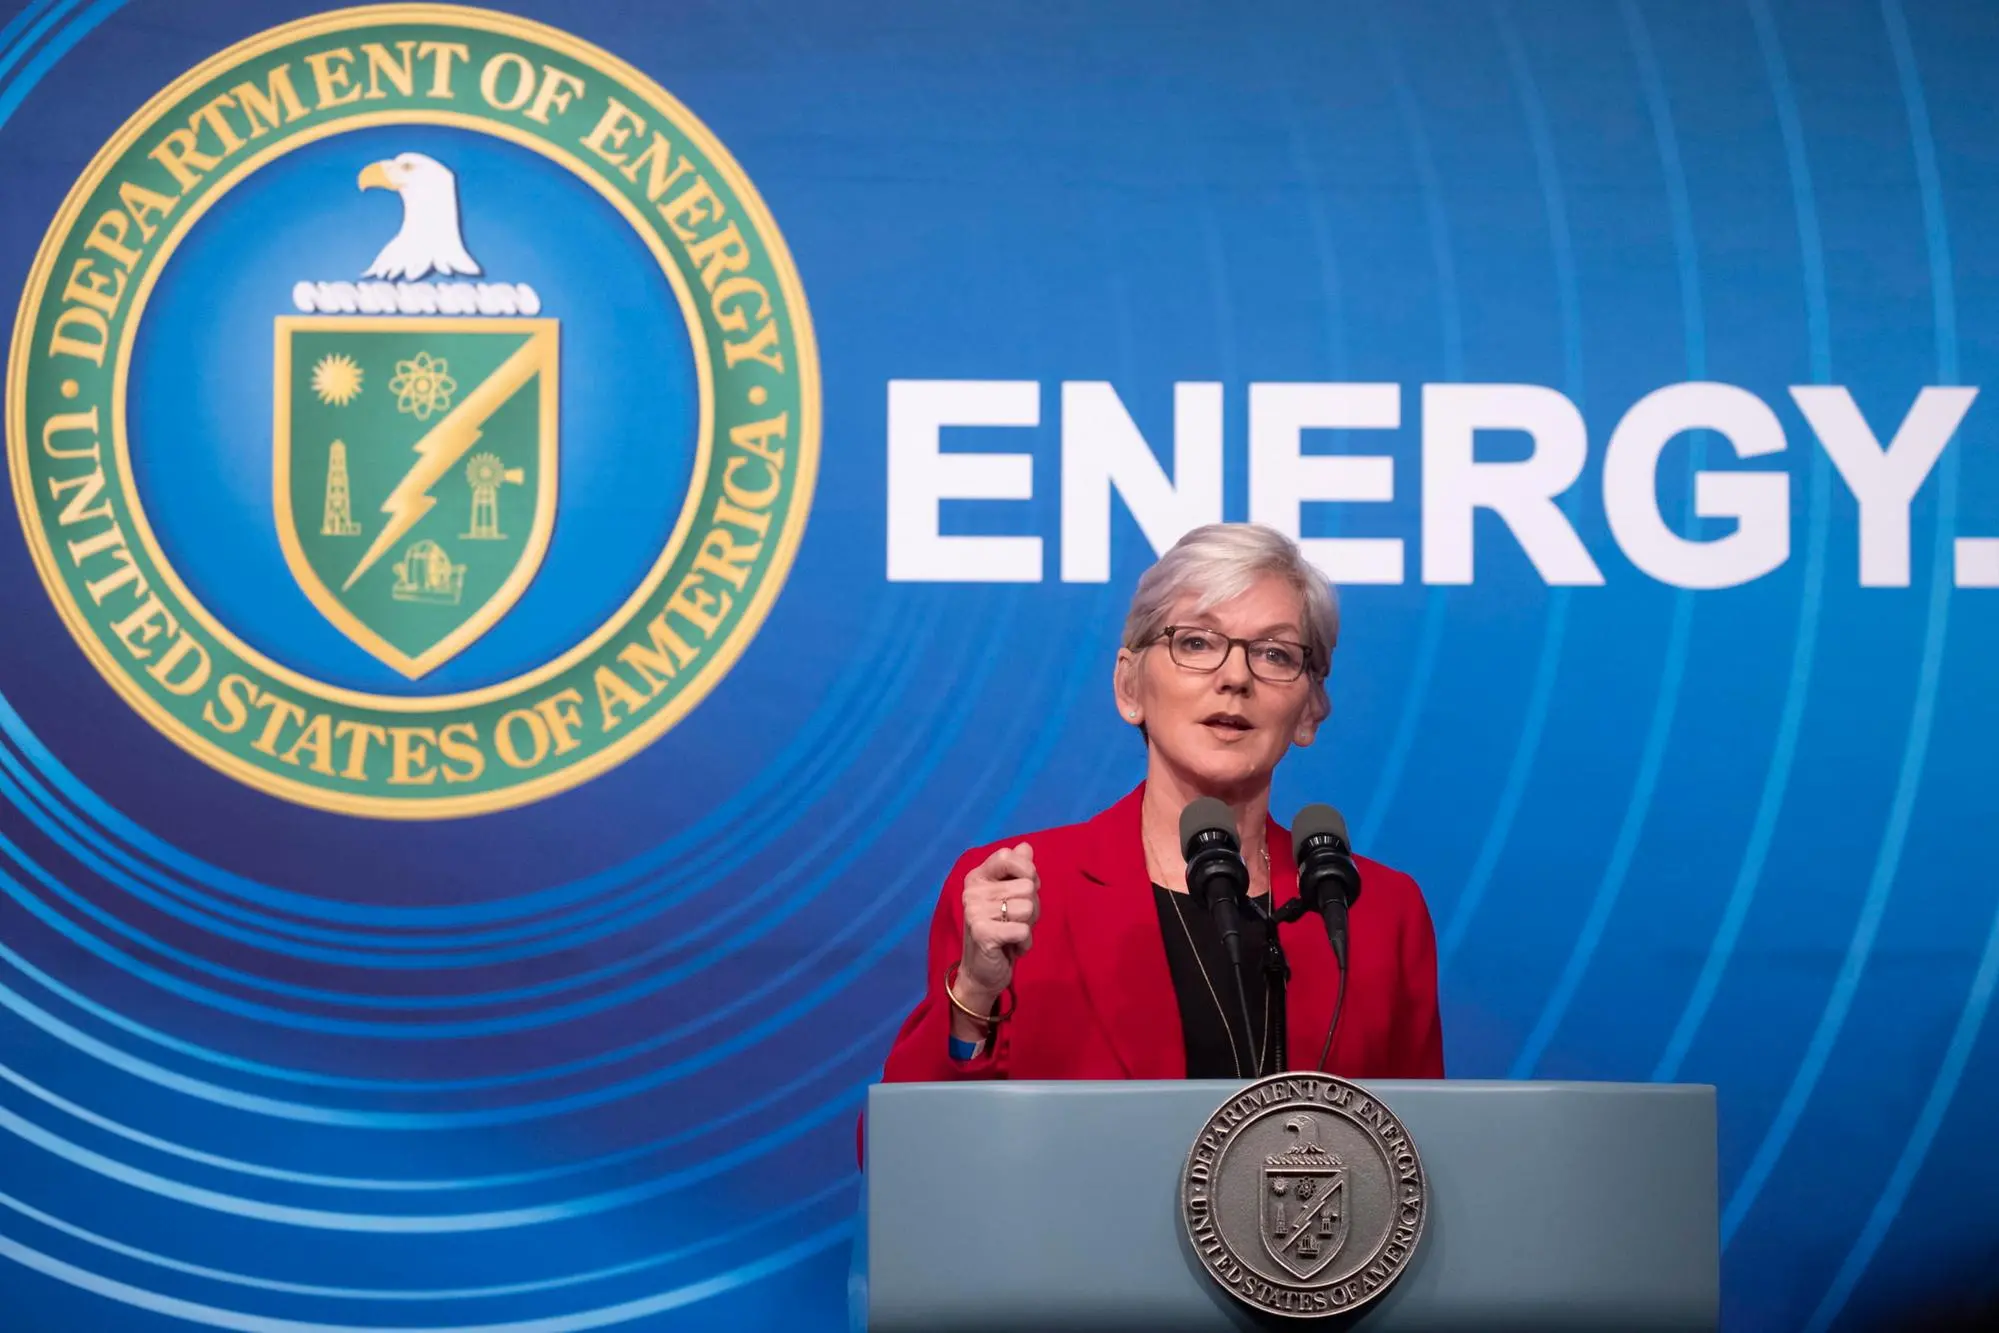 epa10363516 US Secretary of Energy Jennifer Granholm participates in the announcement of a major scientific breakthrough in fusion energy by researchers at National Nuclear Security Administration's (NNSA) Lawrence Livermore National Laboratory, at the Department of Energy in Washington, DC, USA, 13 December 2022. EPA/MICHAEL REYNOLDS